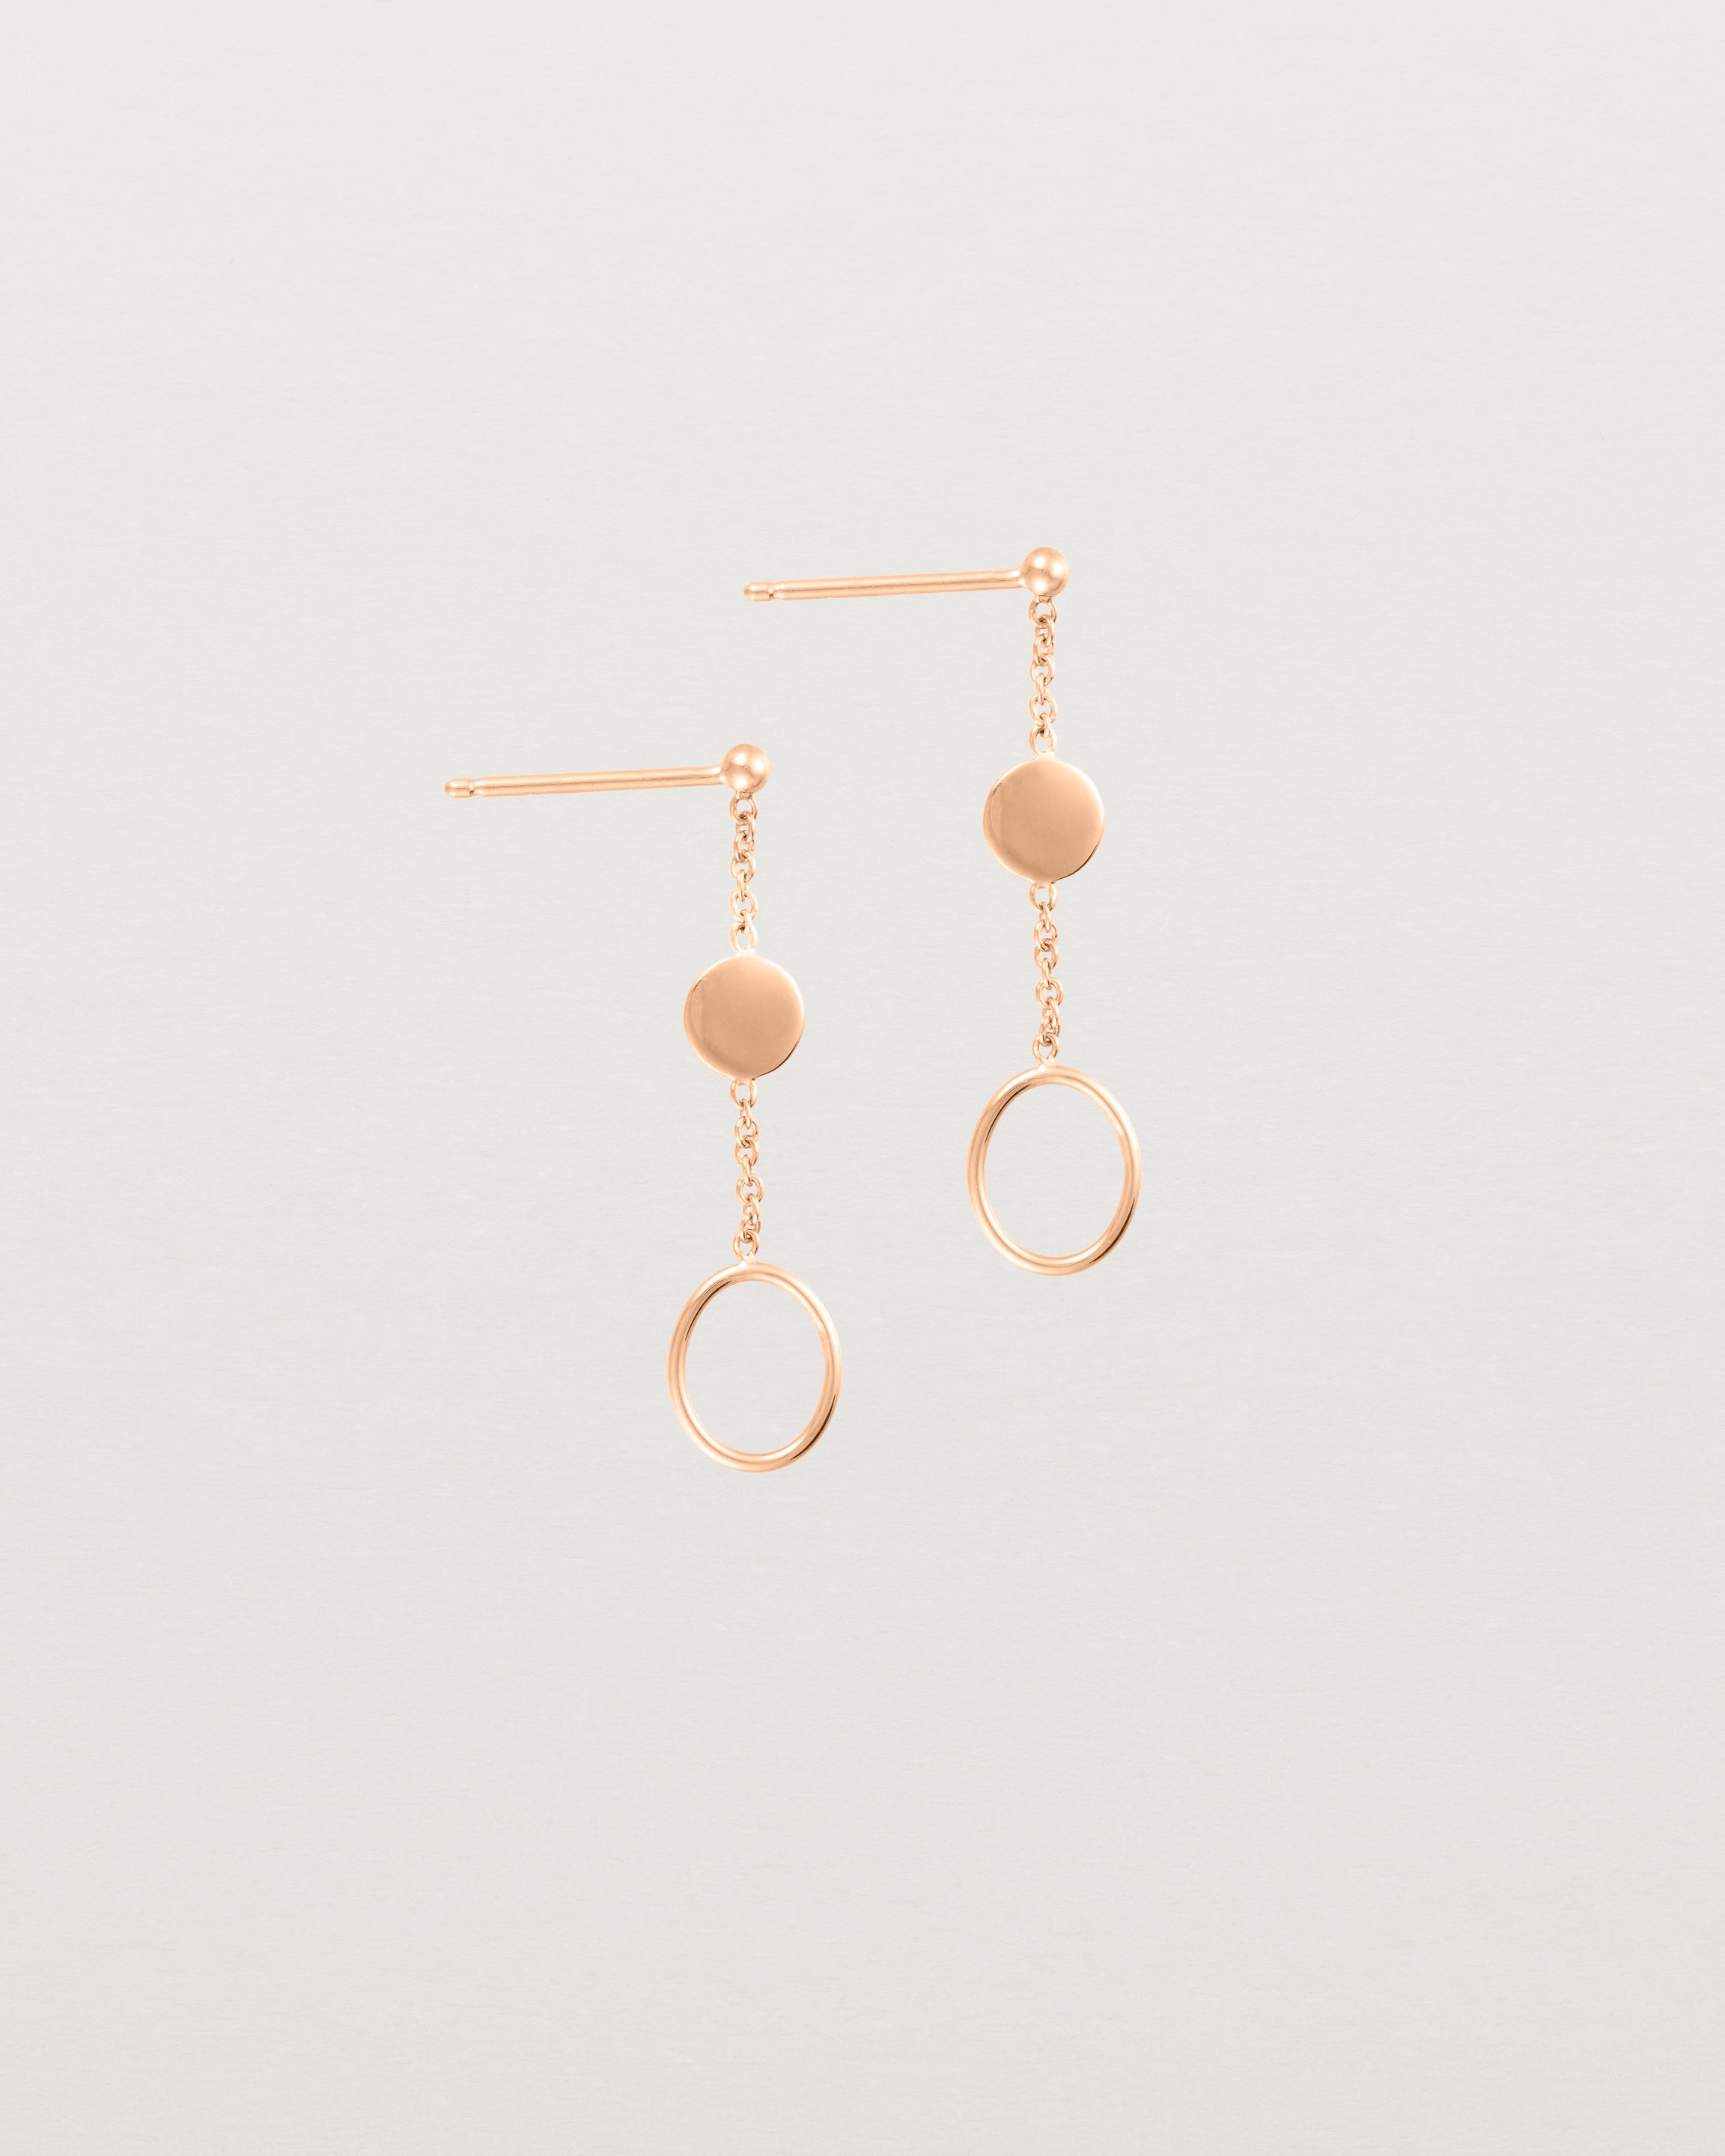 Hanging view of the Aiyana Earrings in Rose Gold.